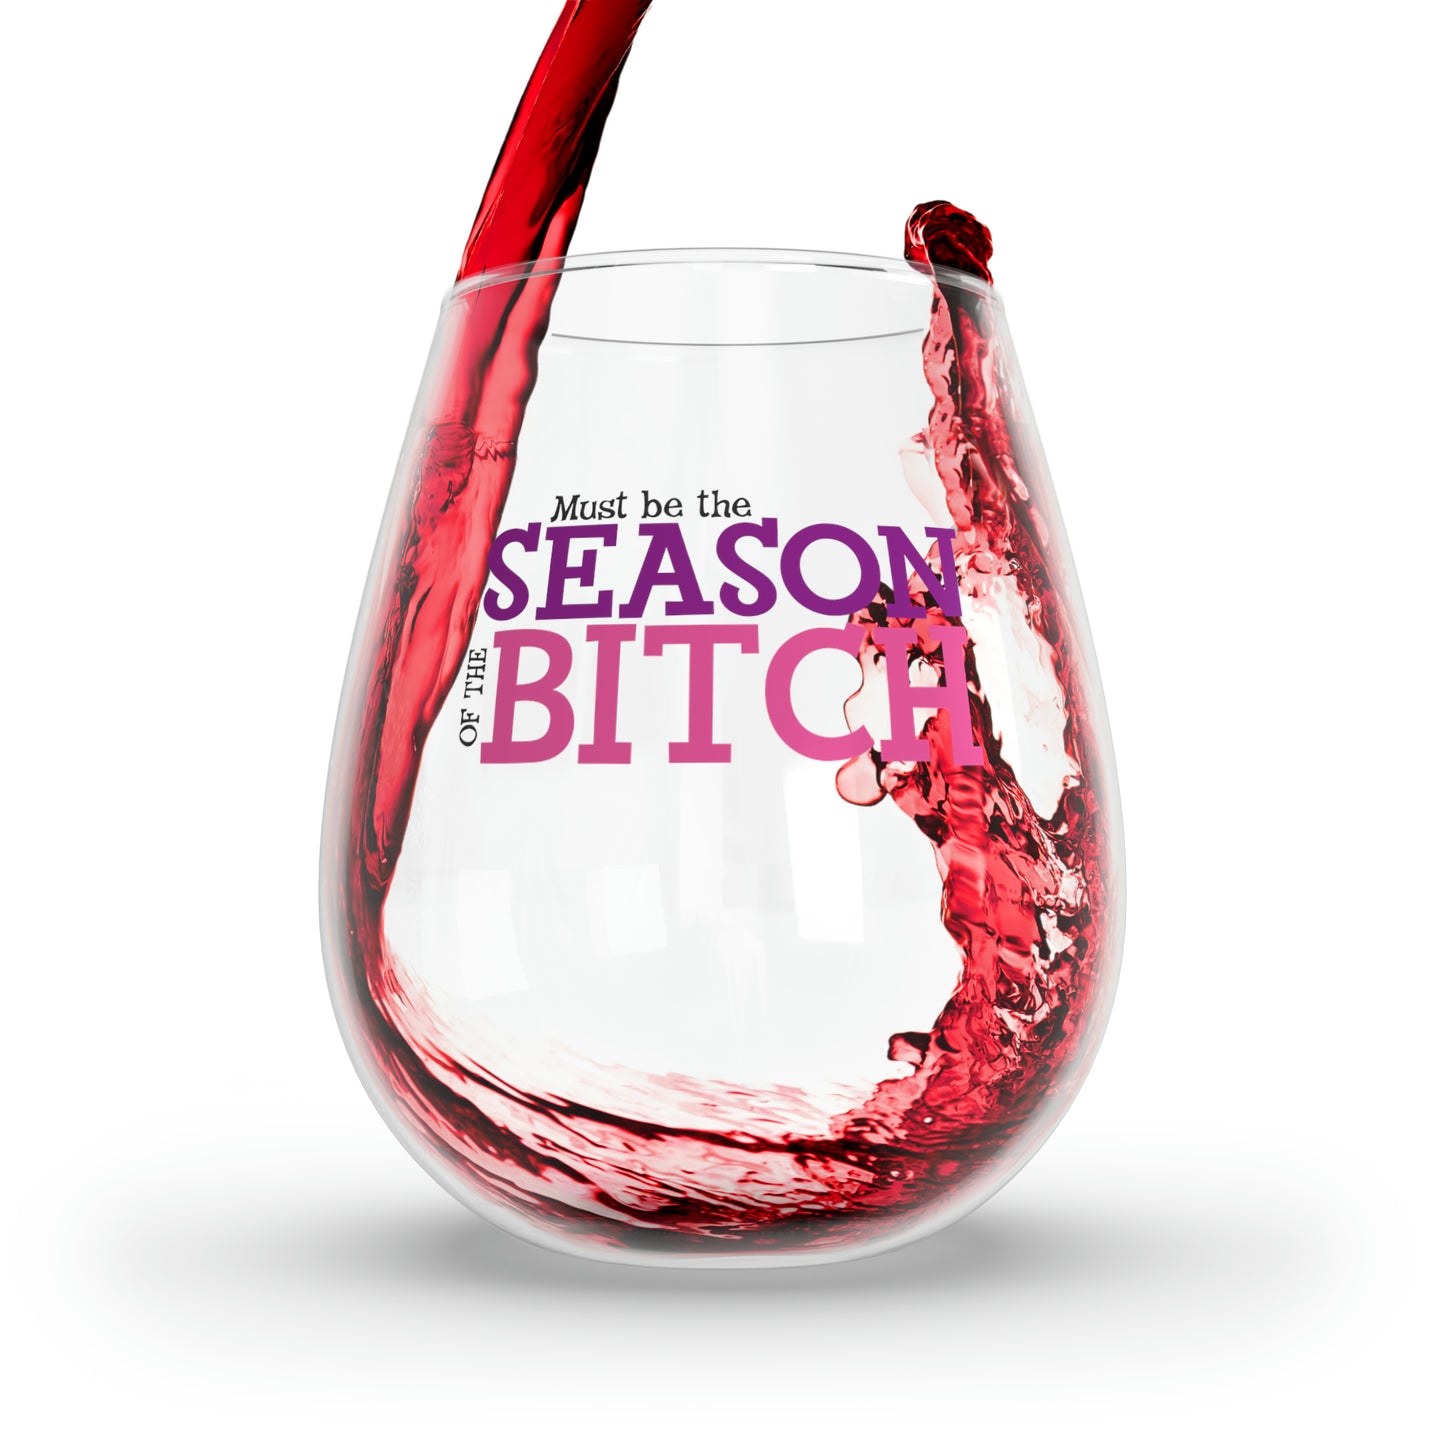 Must be the Season of the Bitch Stemless Wine Glass, 11.75oz